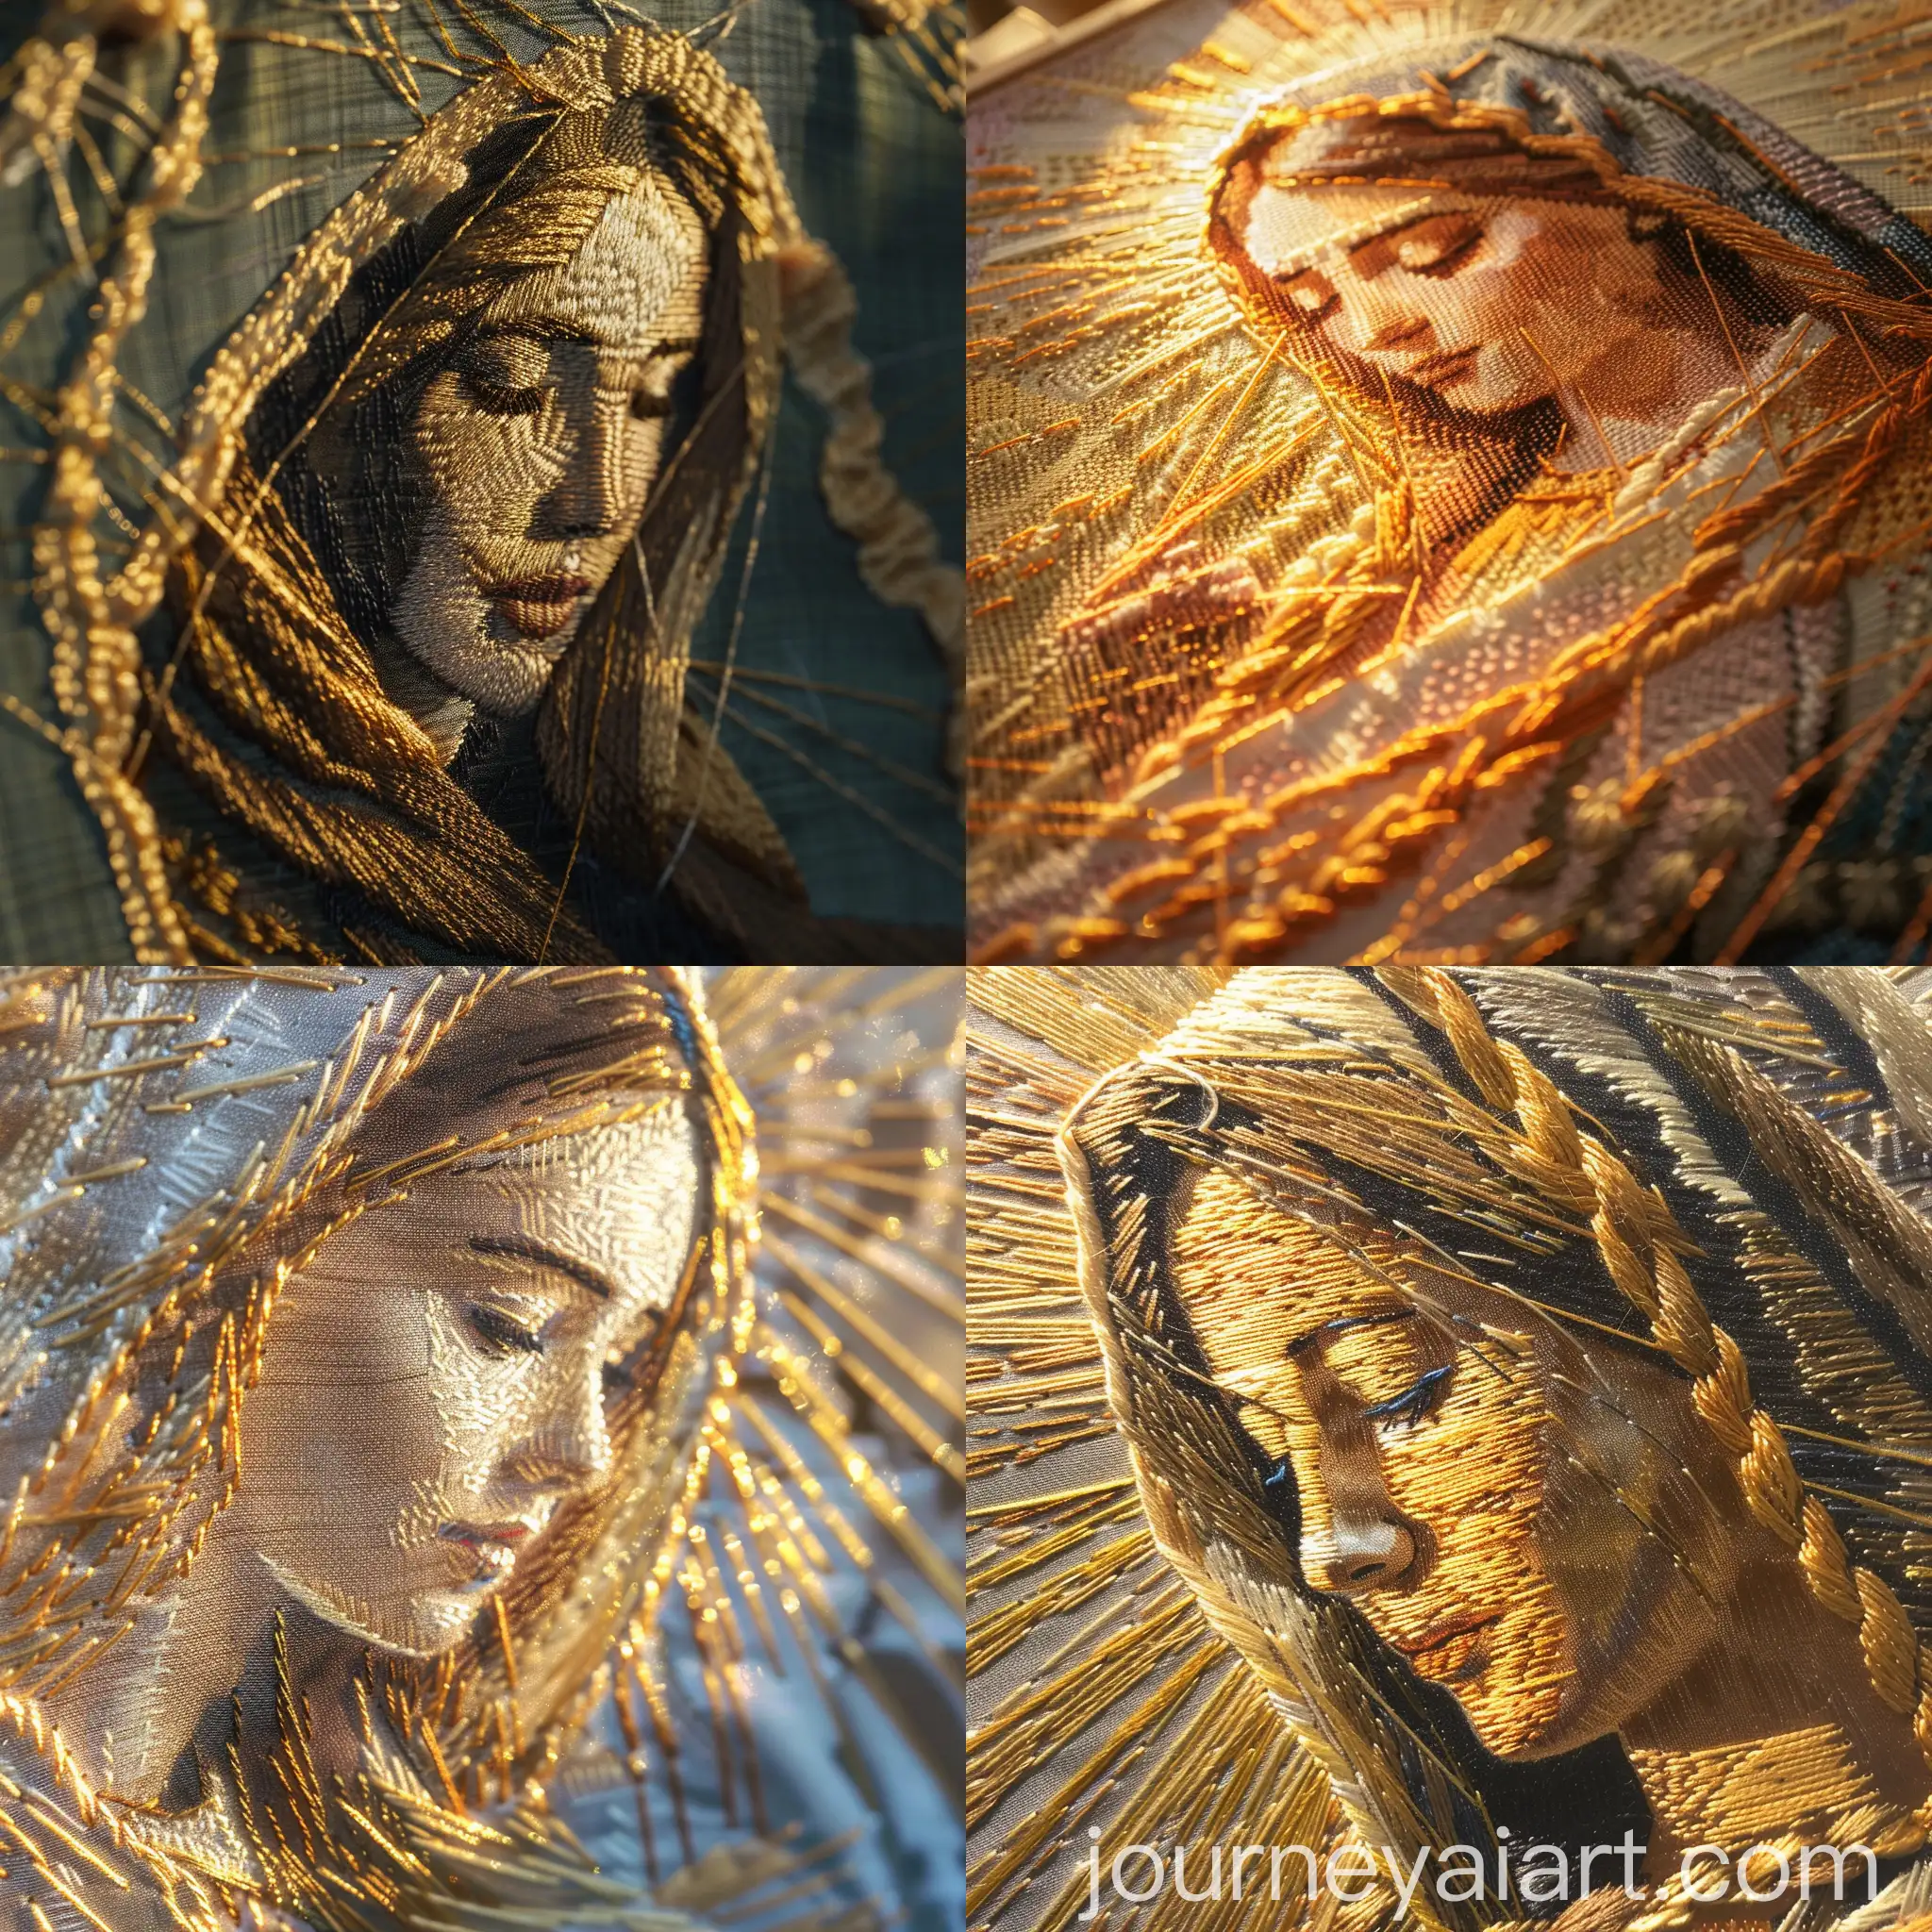 PhotoRealistic-Embroidery-of-Virgin-Mary-in-Golden-Hour-Sunlight